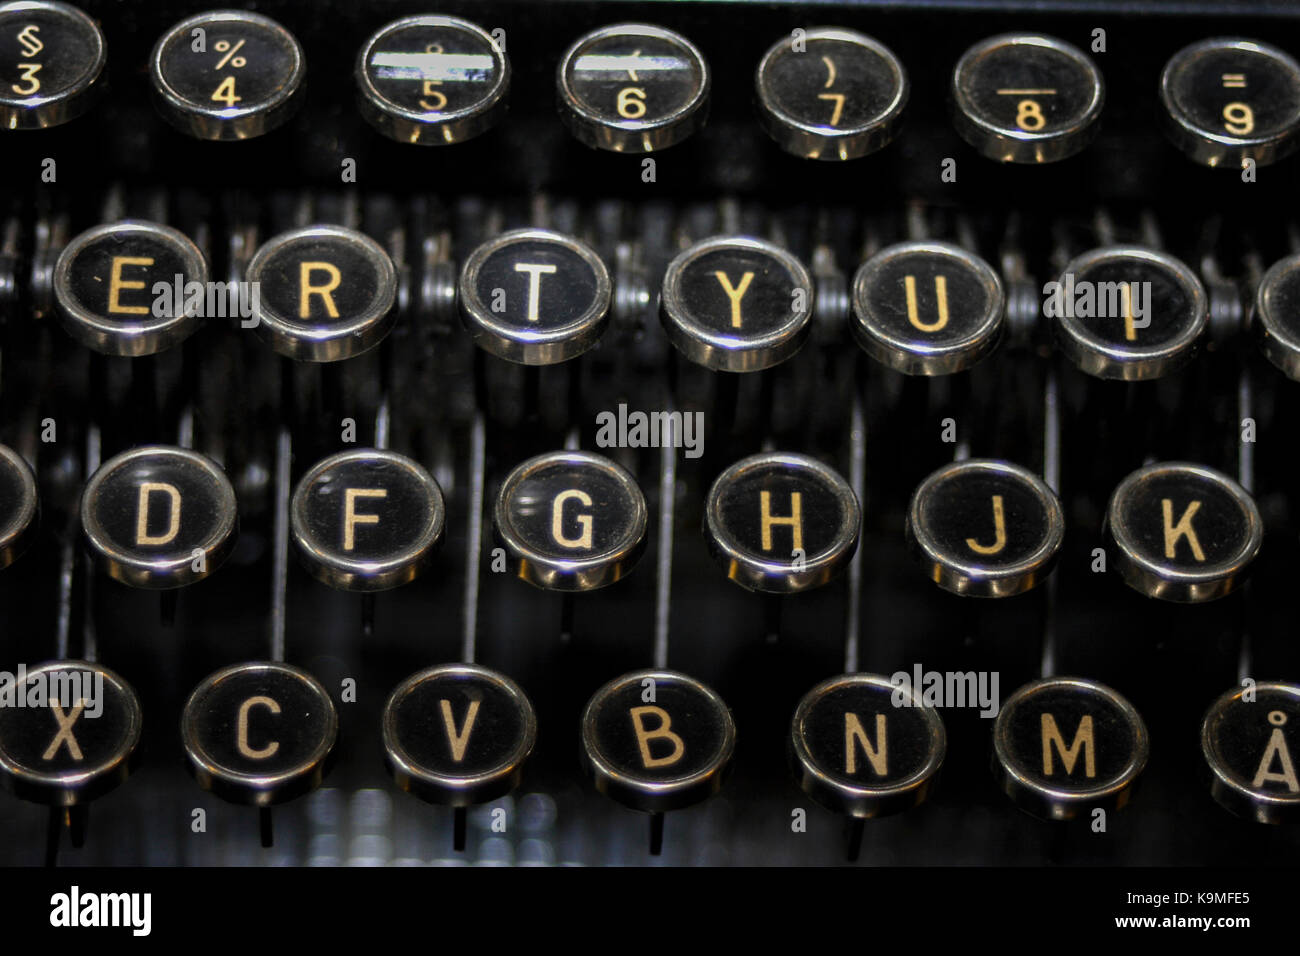 TYPEWRITER keys with letters 2011 Stock Photo